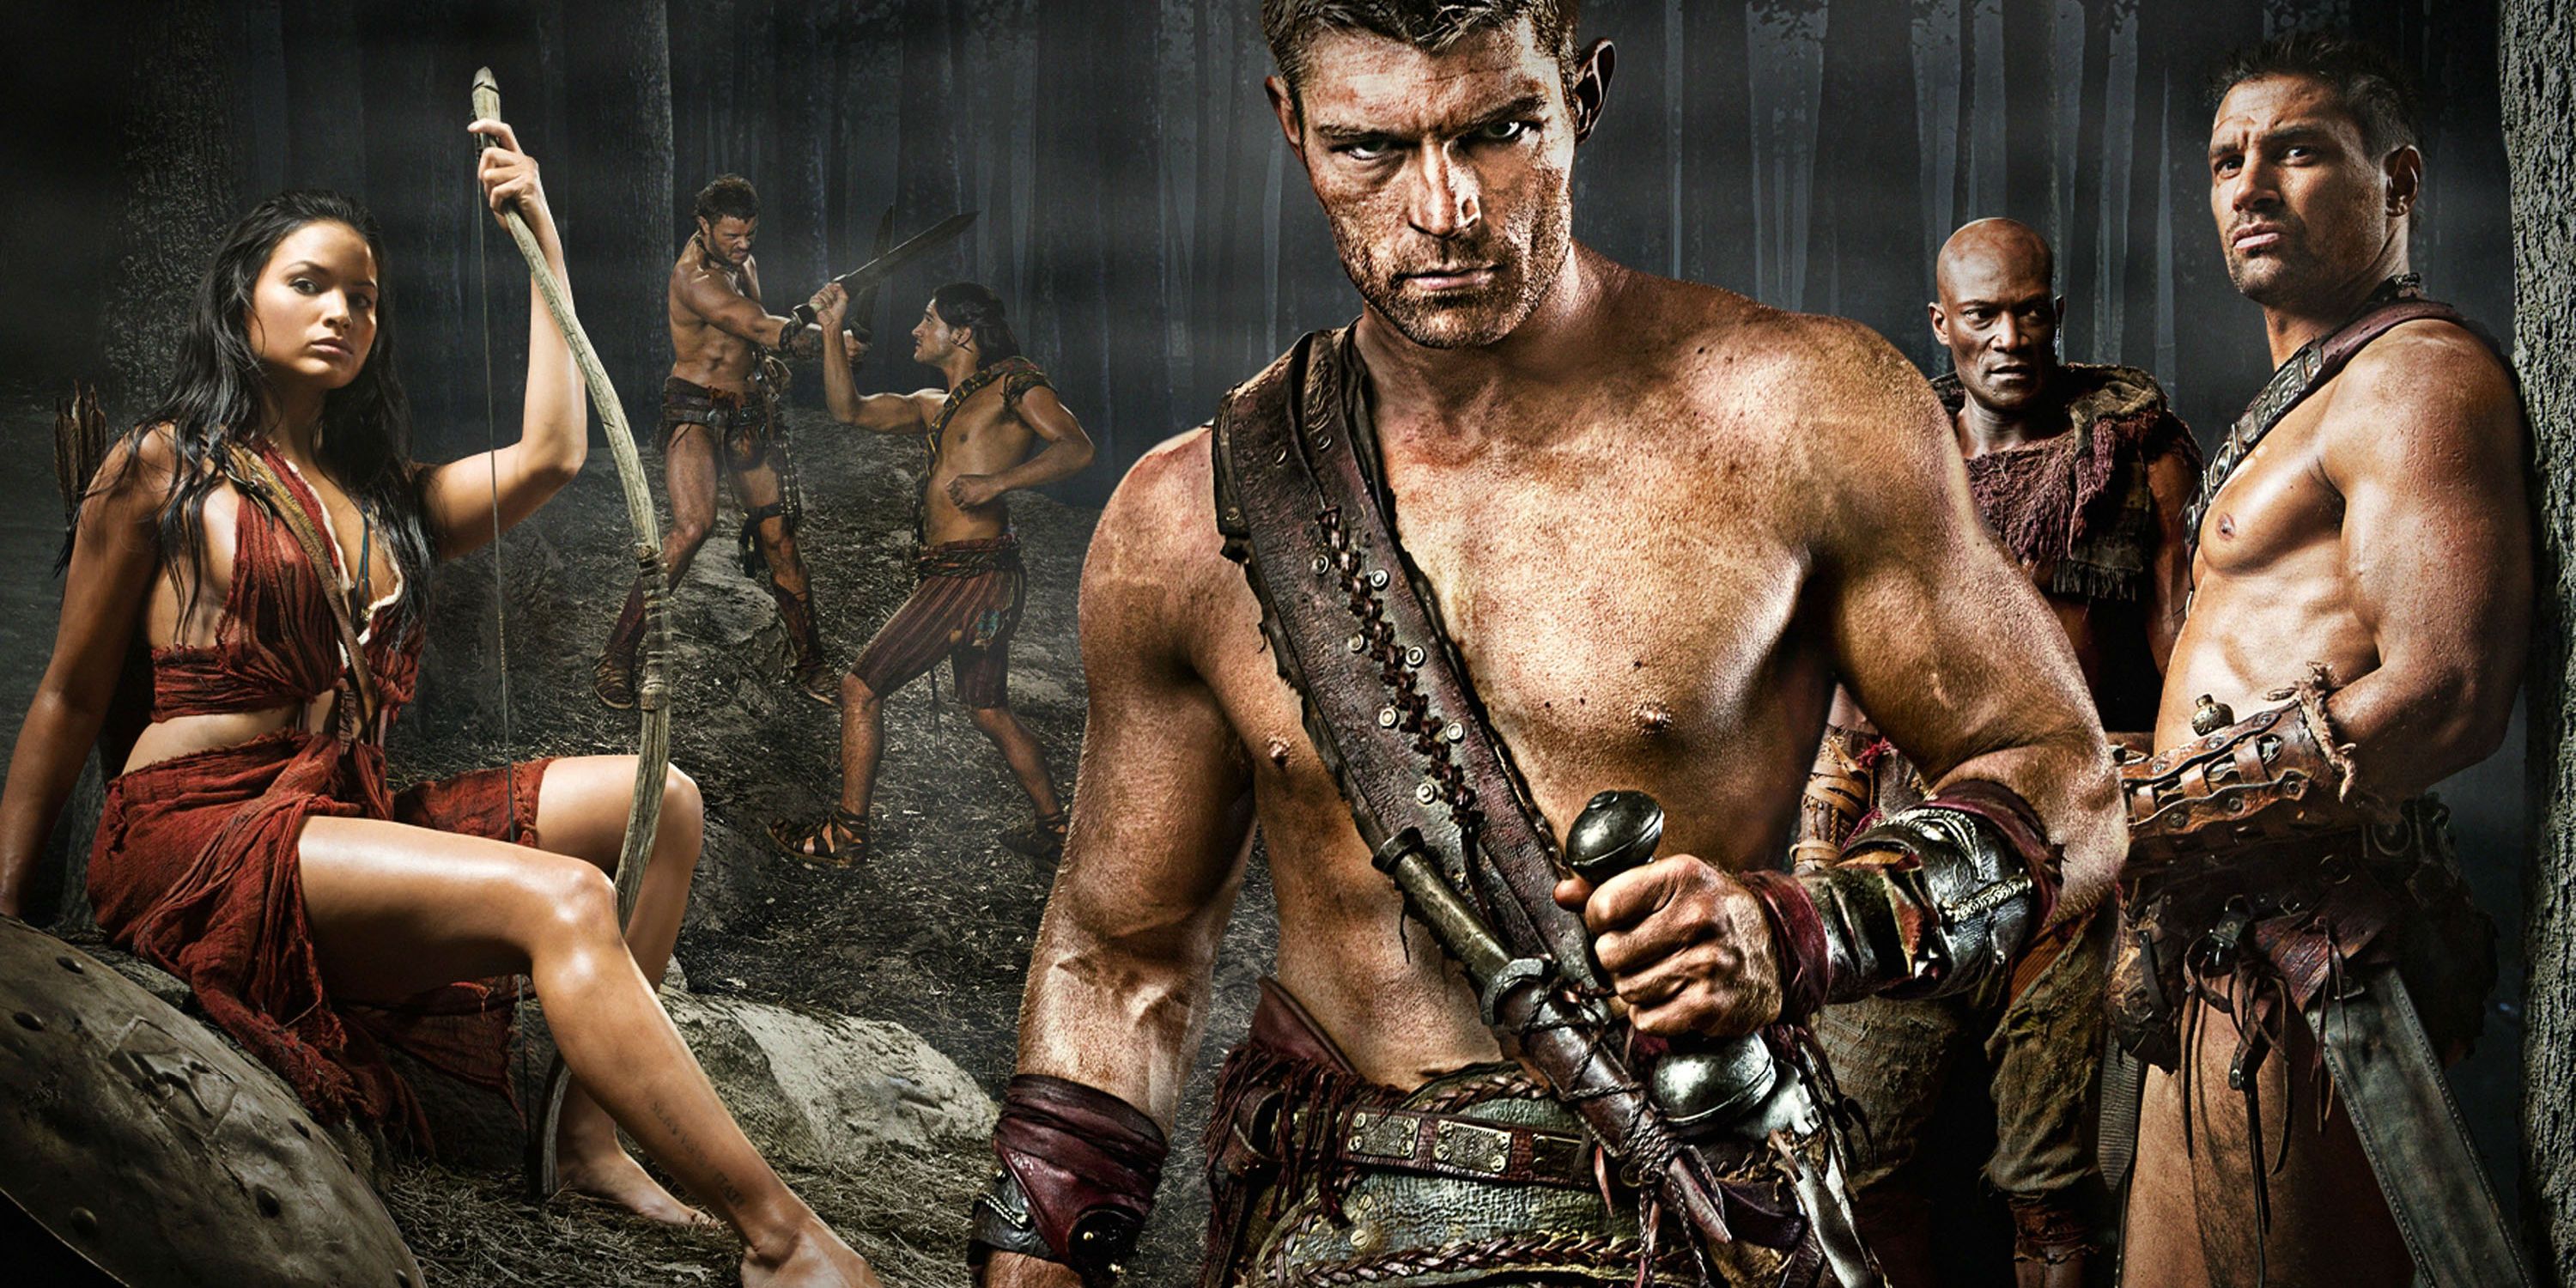 The stars of Spartacus Vengeance